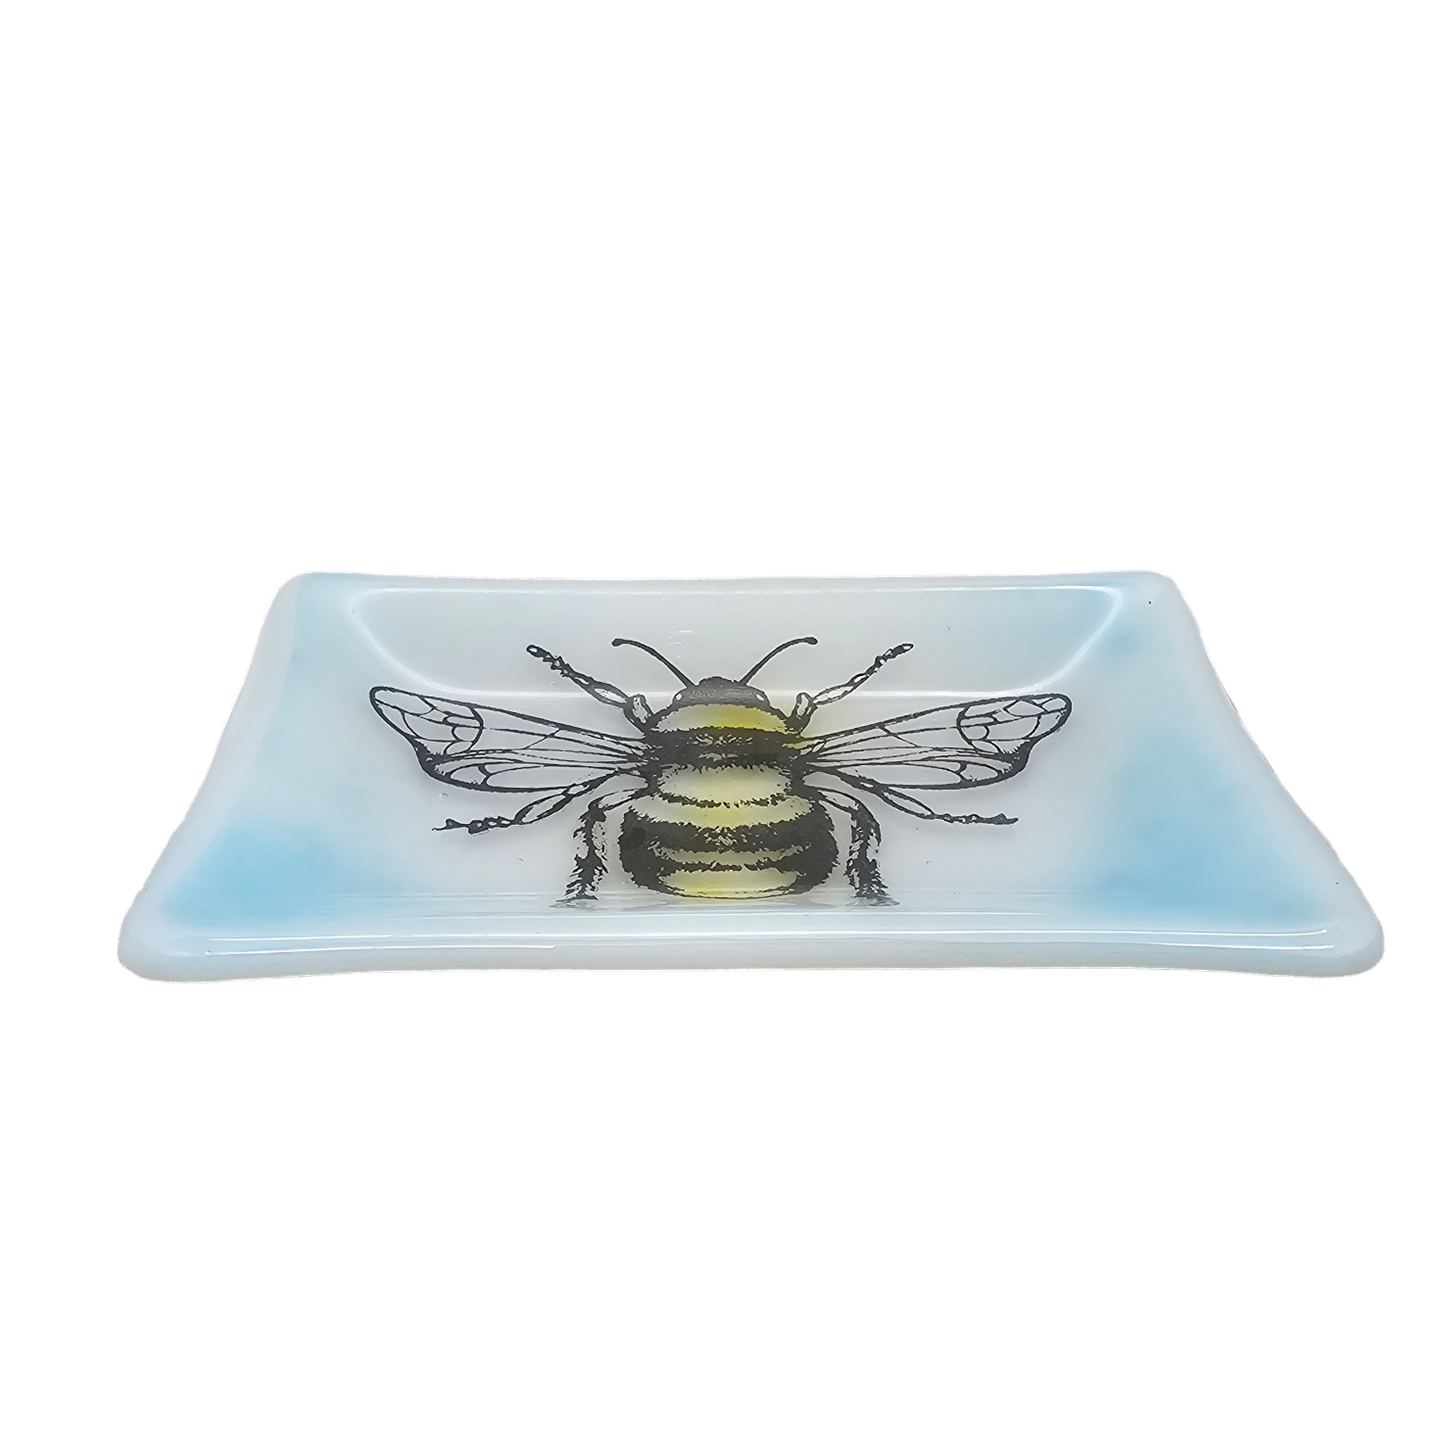 Bumble Bee Dish, Fused Glass Dish, Yellow, Blue and White